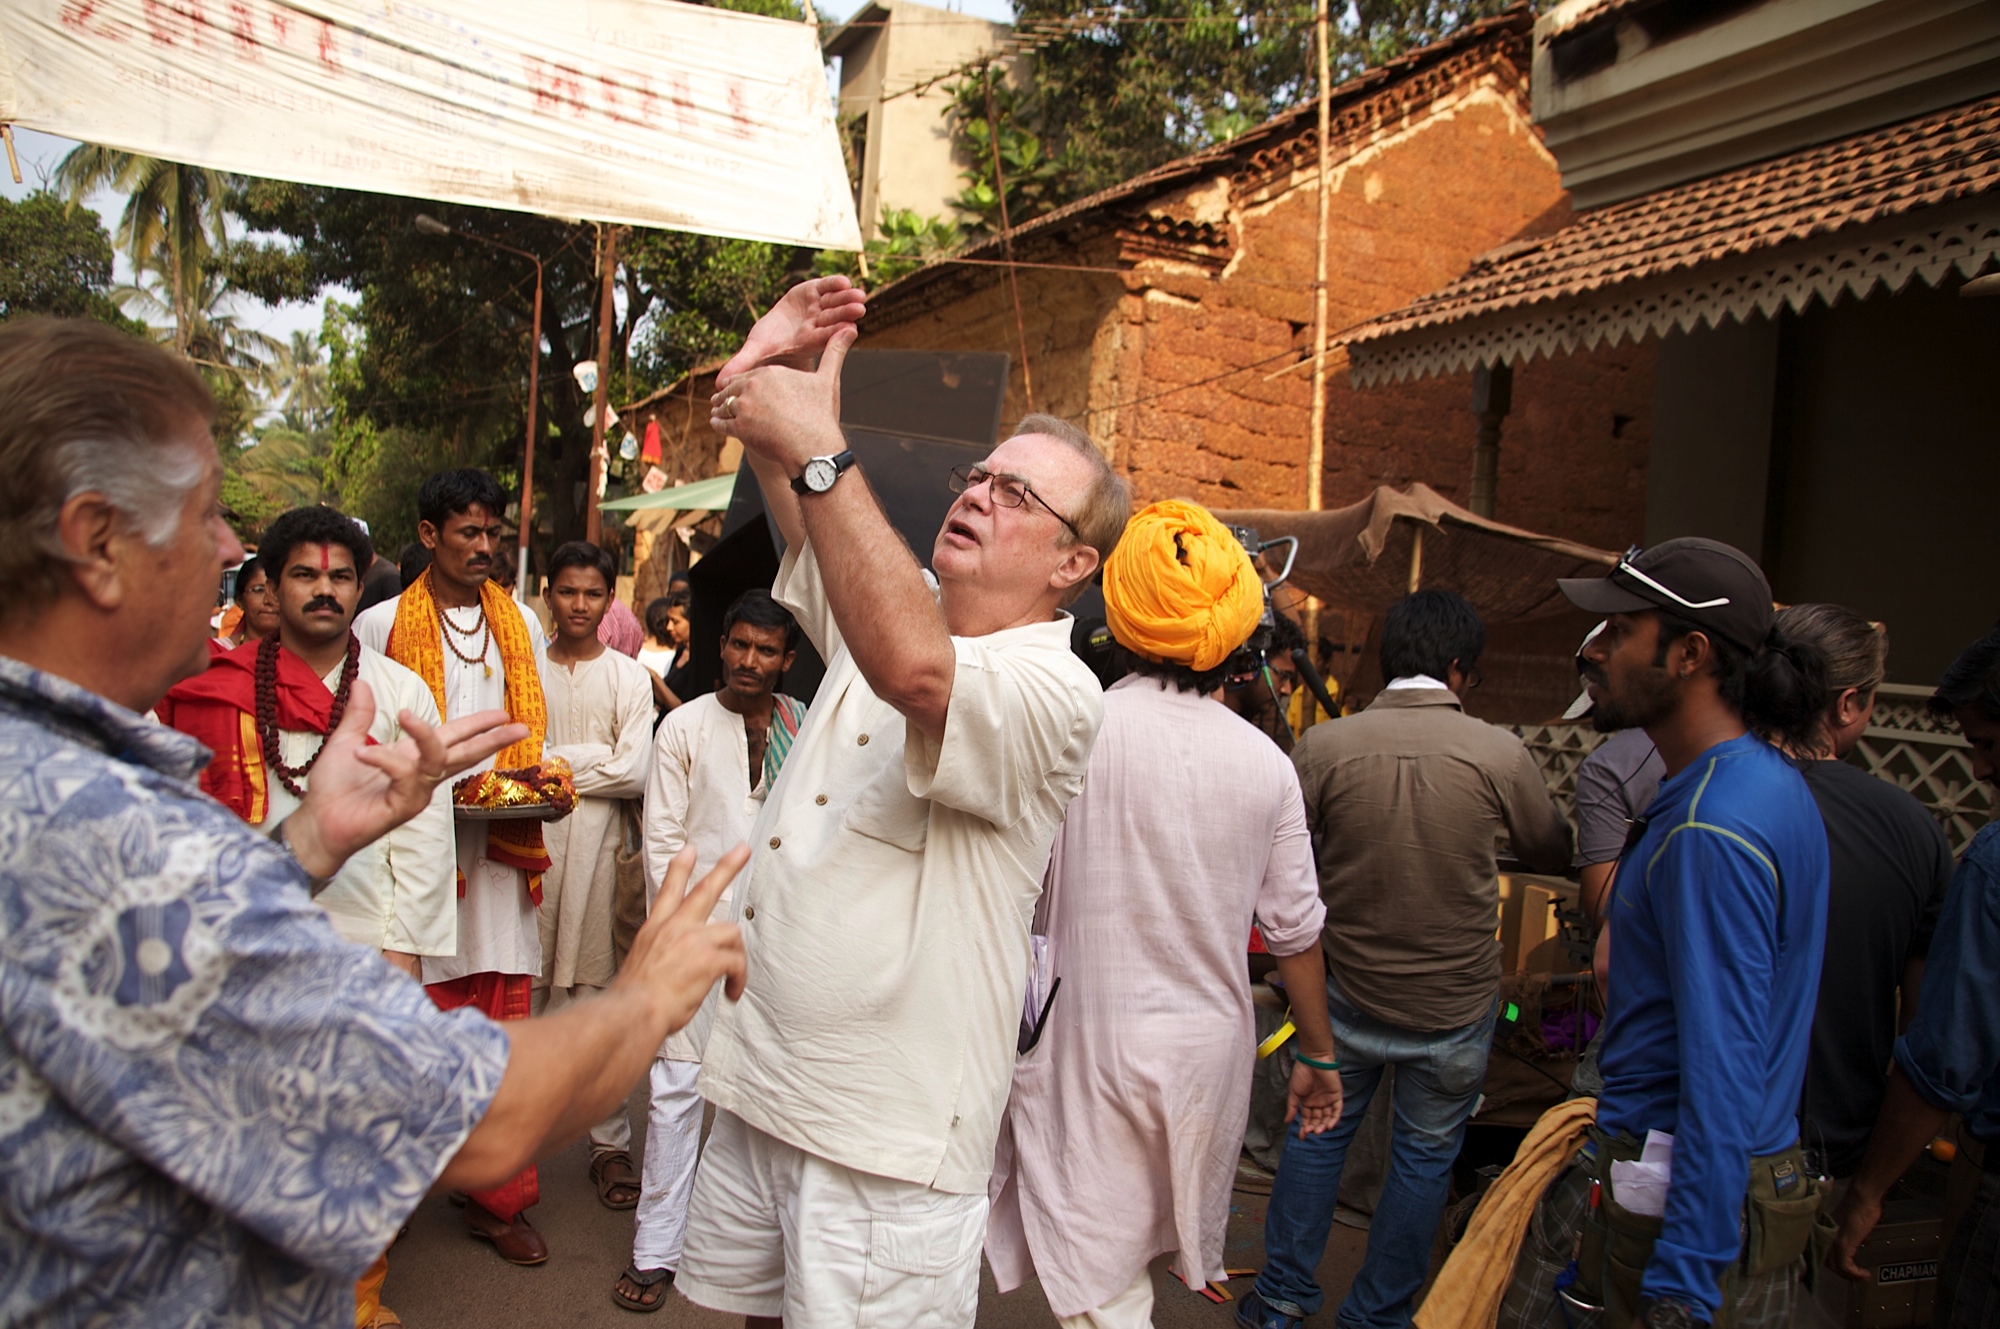 William Riead setting a shot on The Letters set in Goa, India.